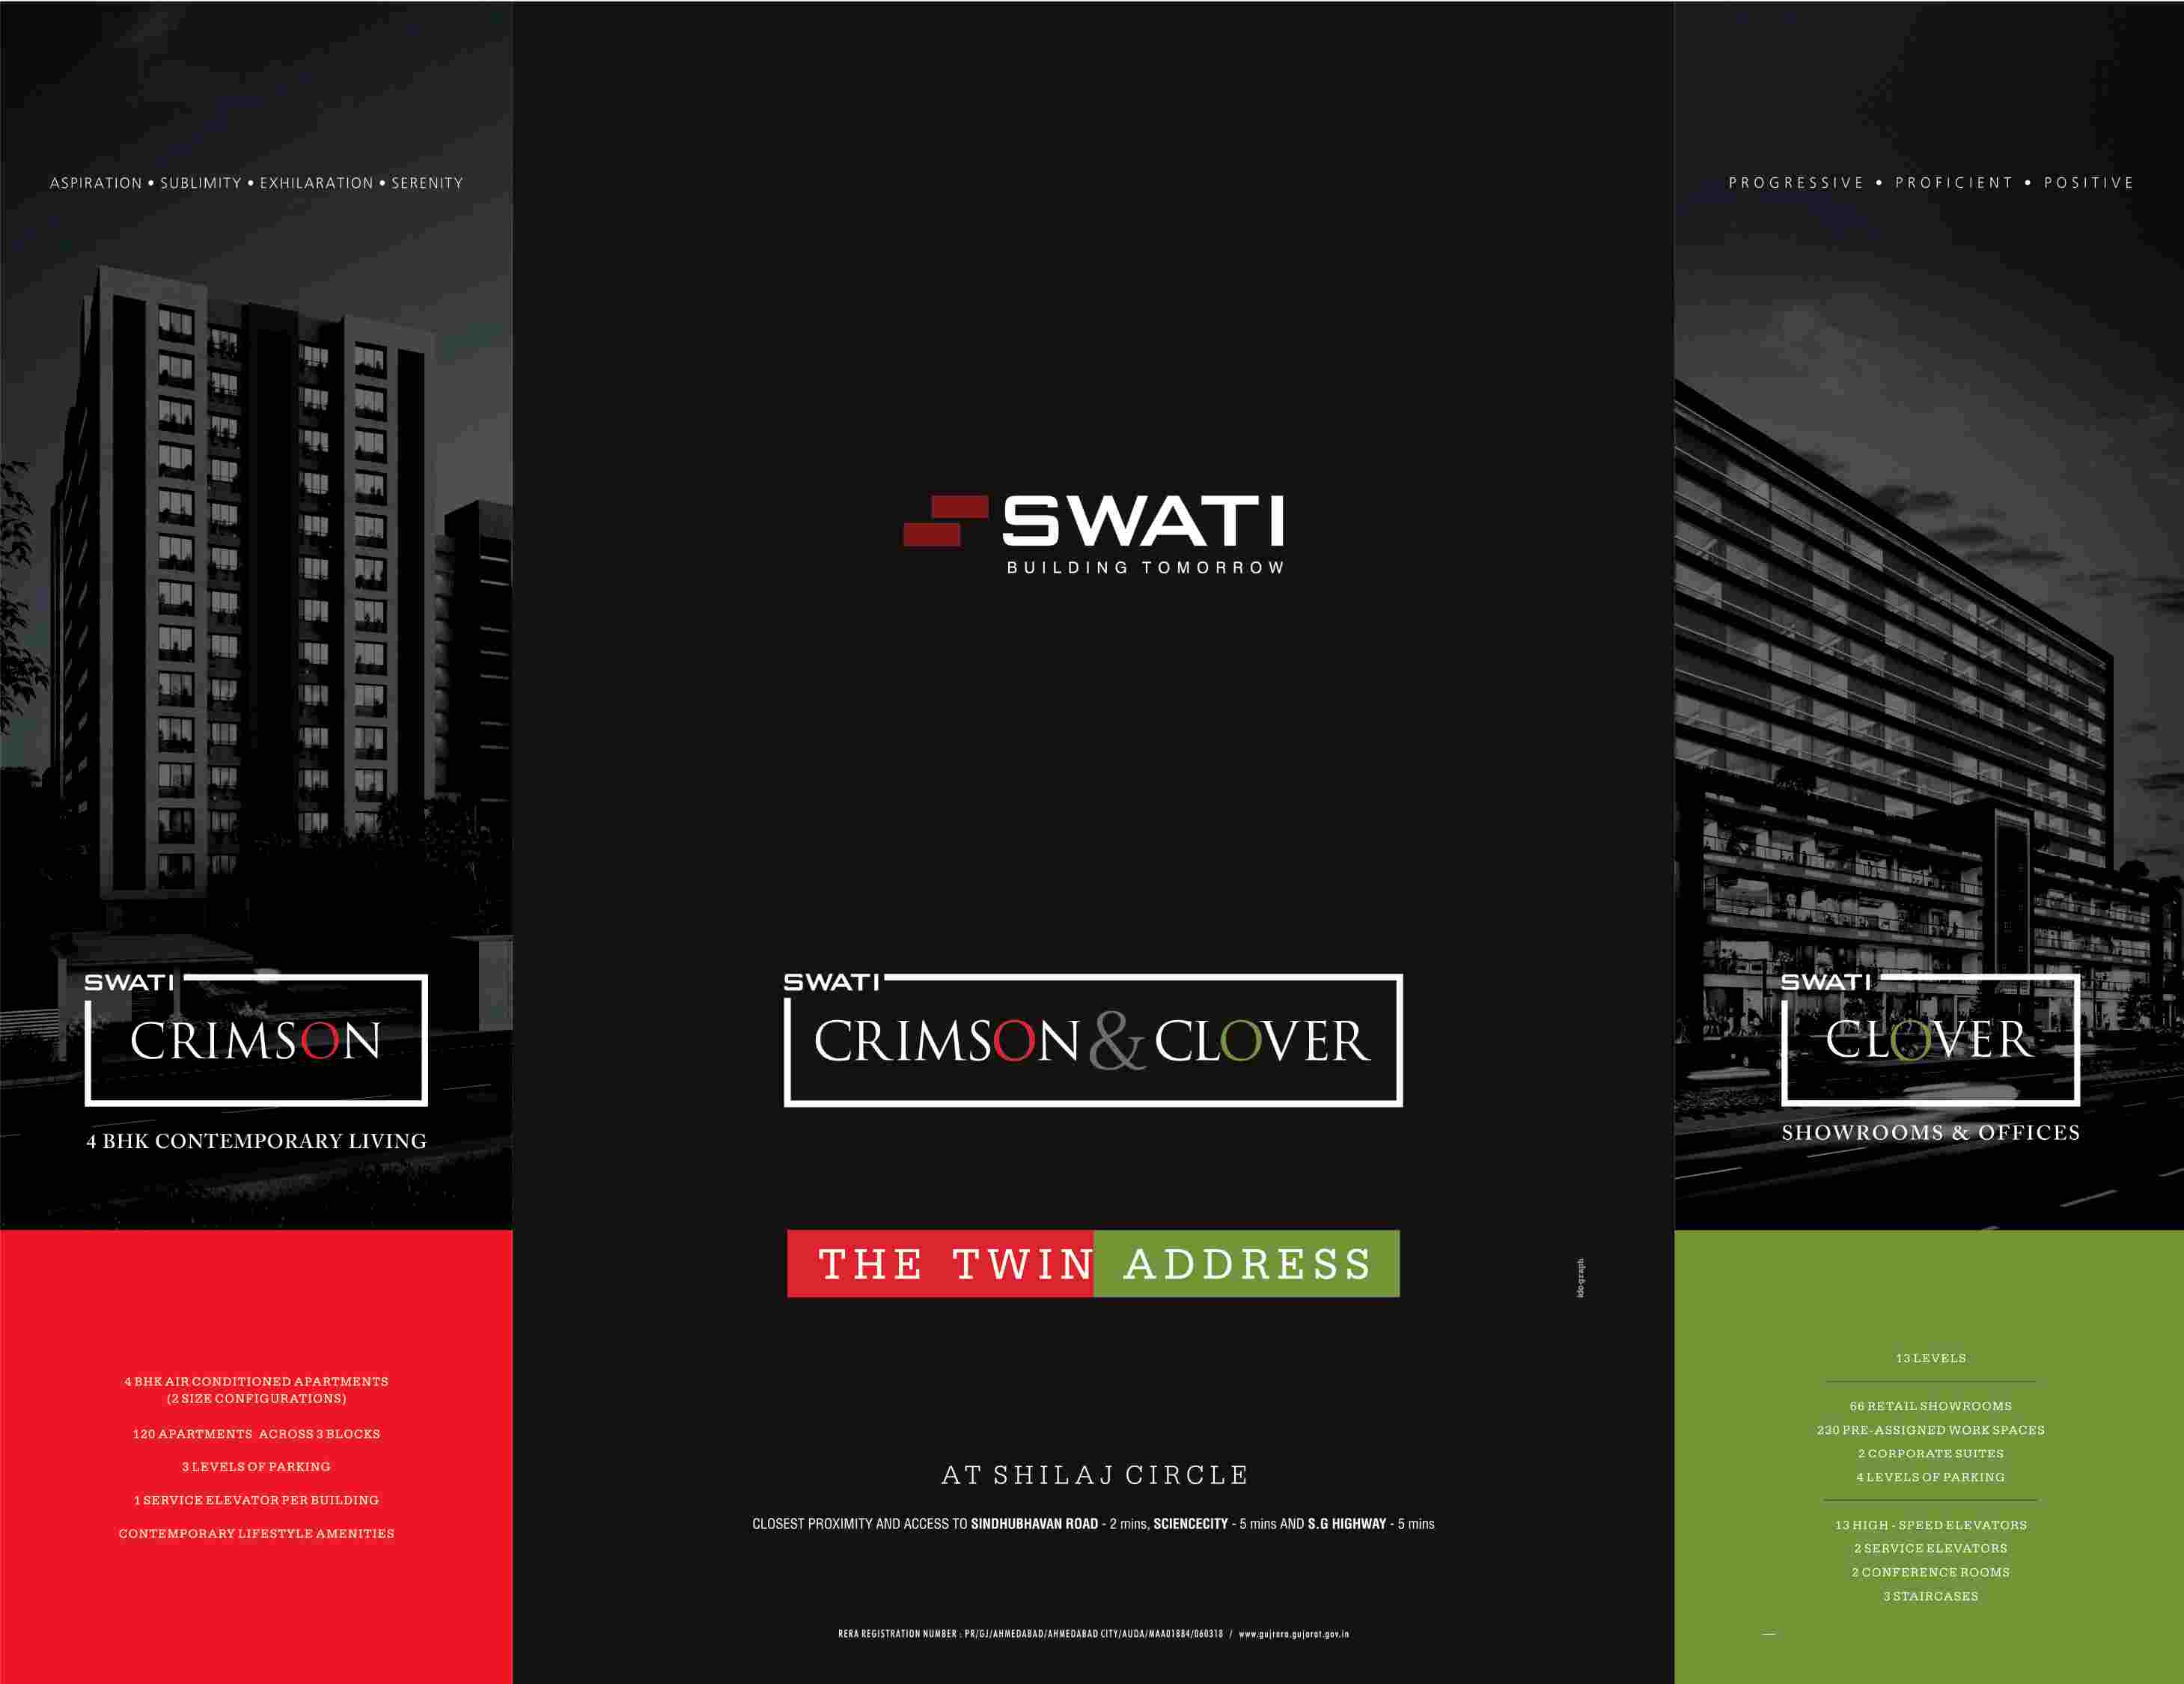 Presenting Crimpson & Clover, the twin address by Swati Procon in Ahmedabad